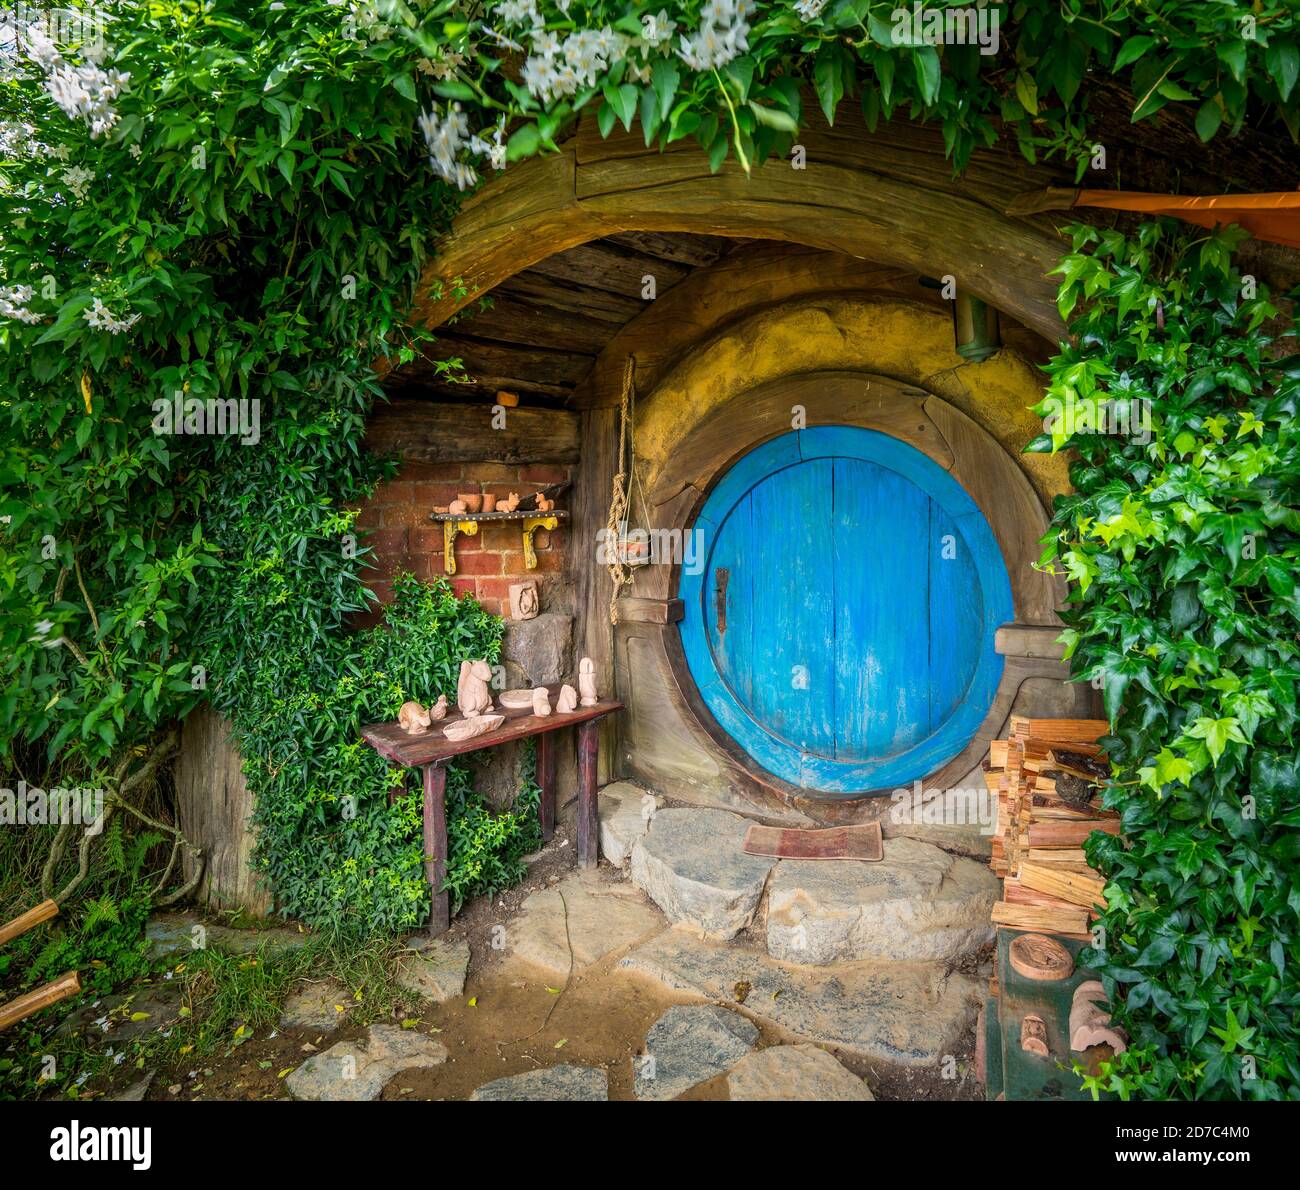 Matamata, New Zealand - Dec 11, 2016: Hobbiton movie set created for filming The Lord of the Rings and The Hobbit movies in North Island of New Stock Photo